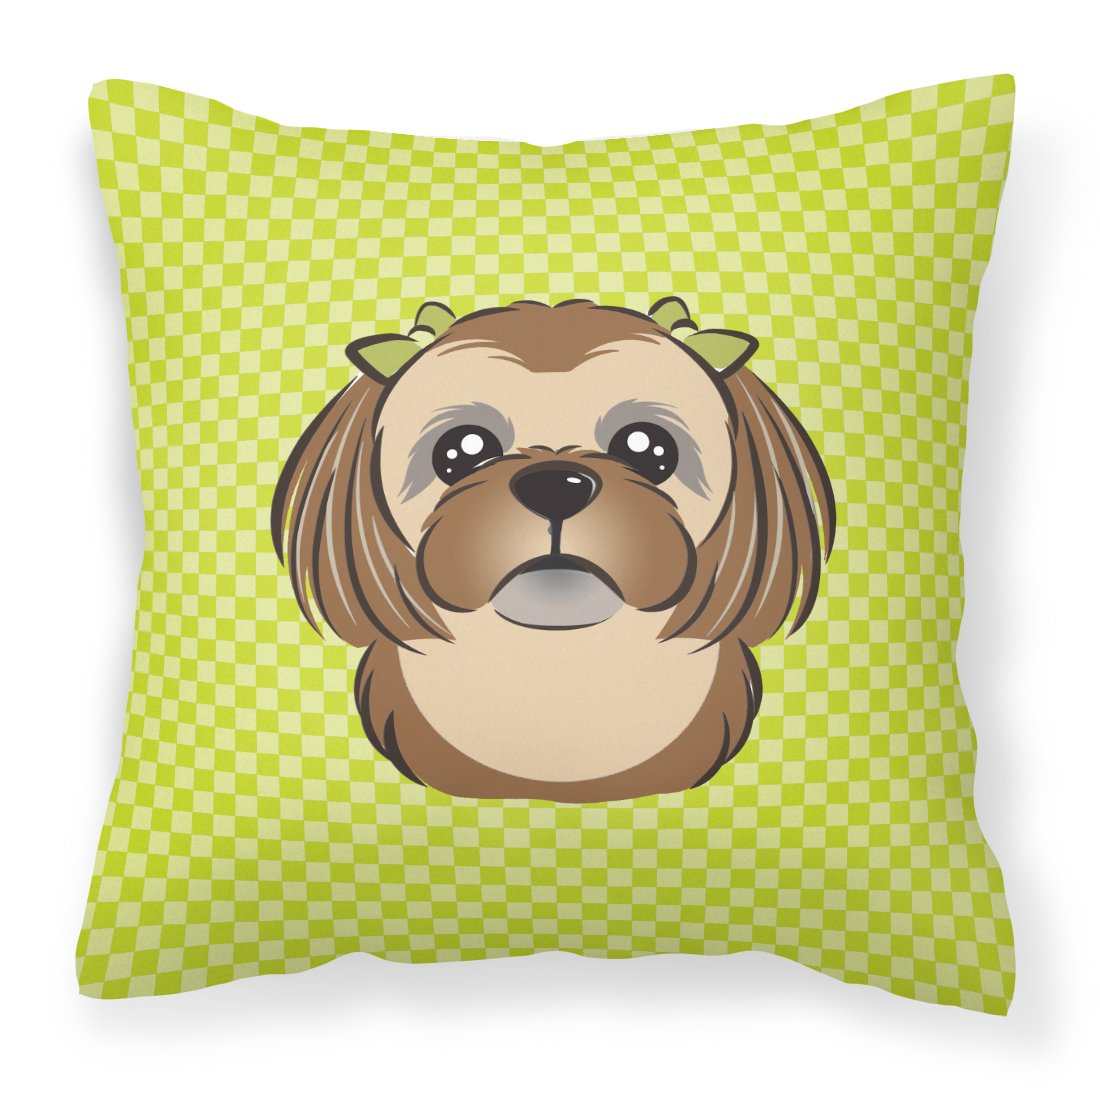 Checkerboard Lime Green Chocolate Brown Shih Tzu Canvas Fabric Decorative Pillow by Caroline's Treasures